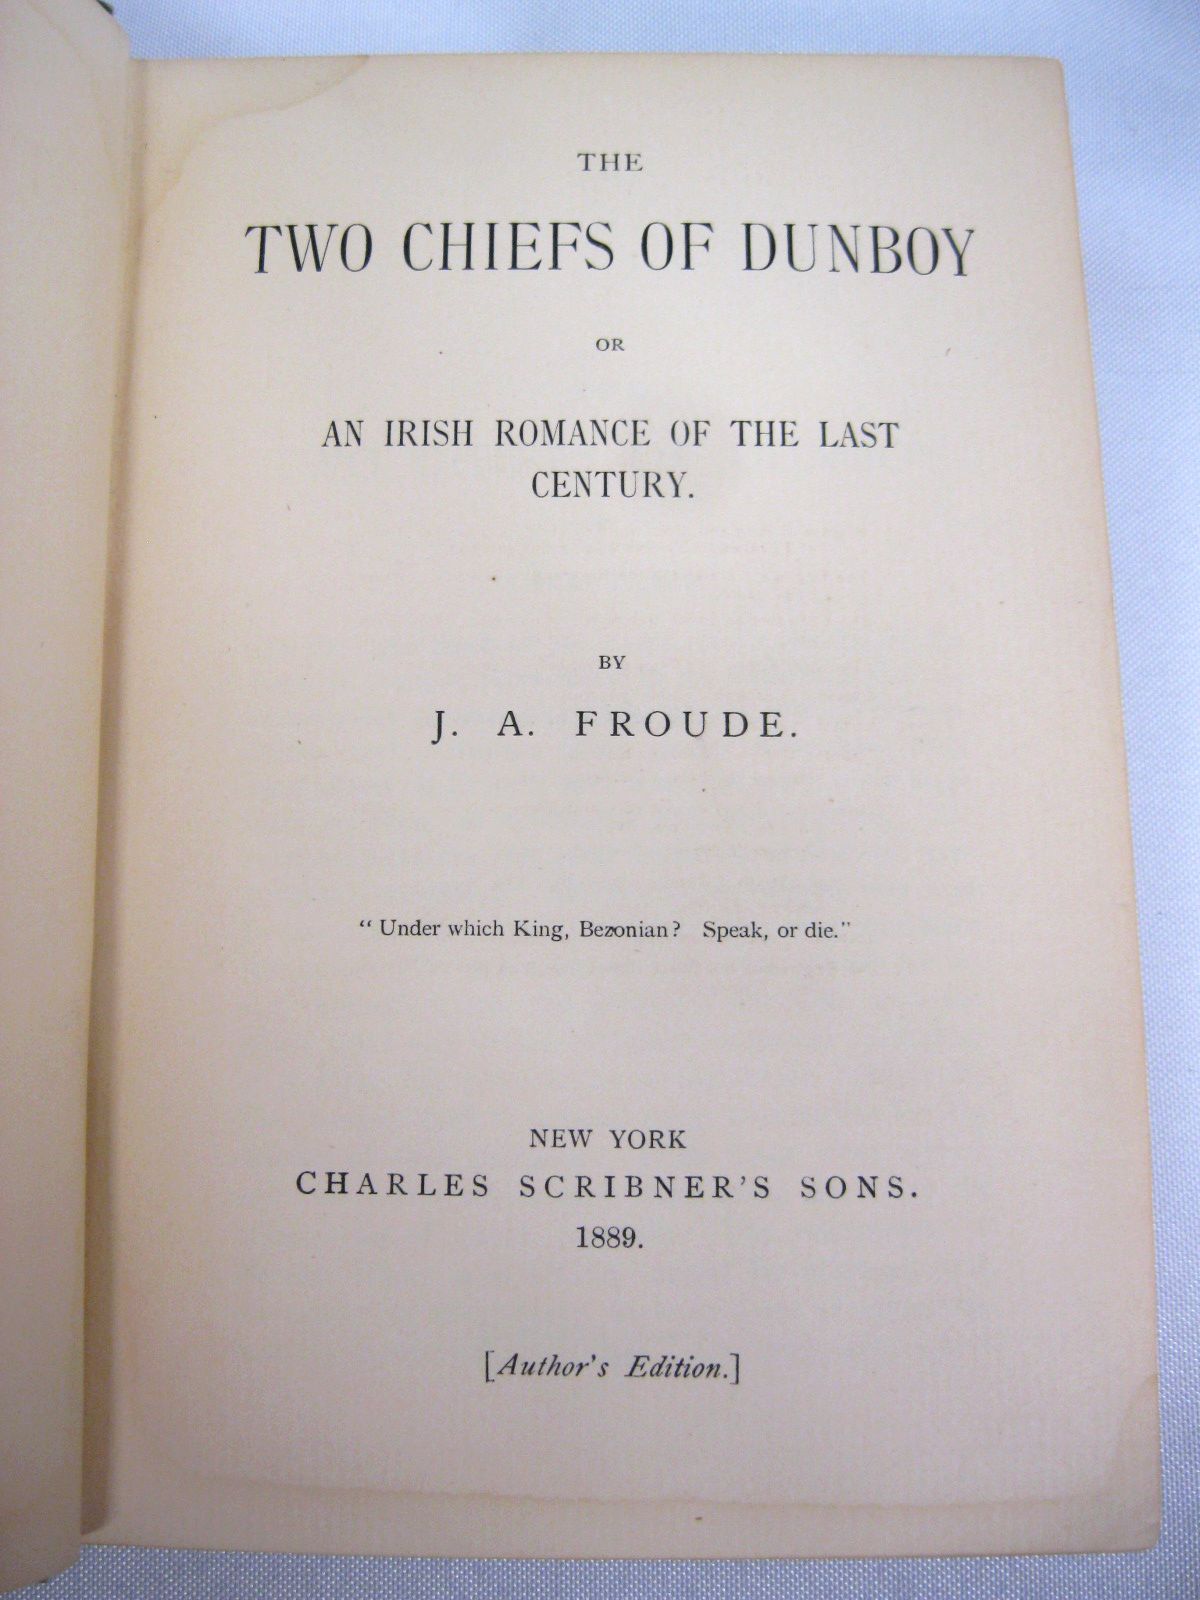 The Two Chiefs of Dunboy: an Irish Romance of the Last Century by James Anthony Froude